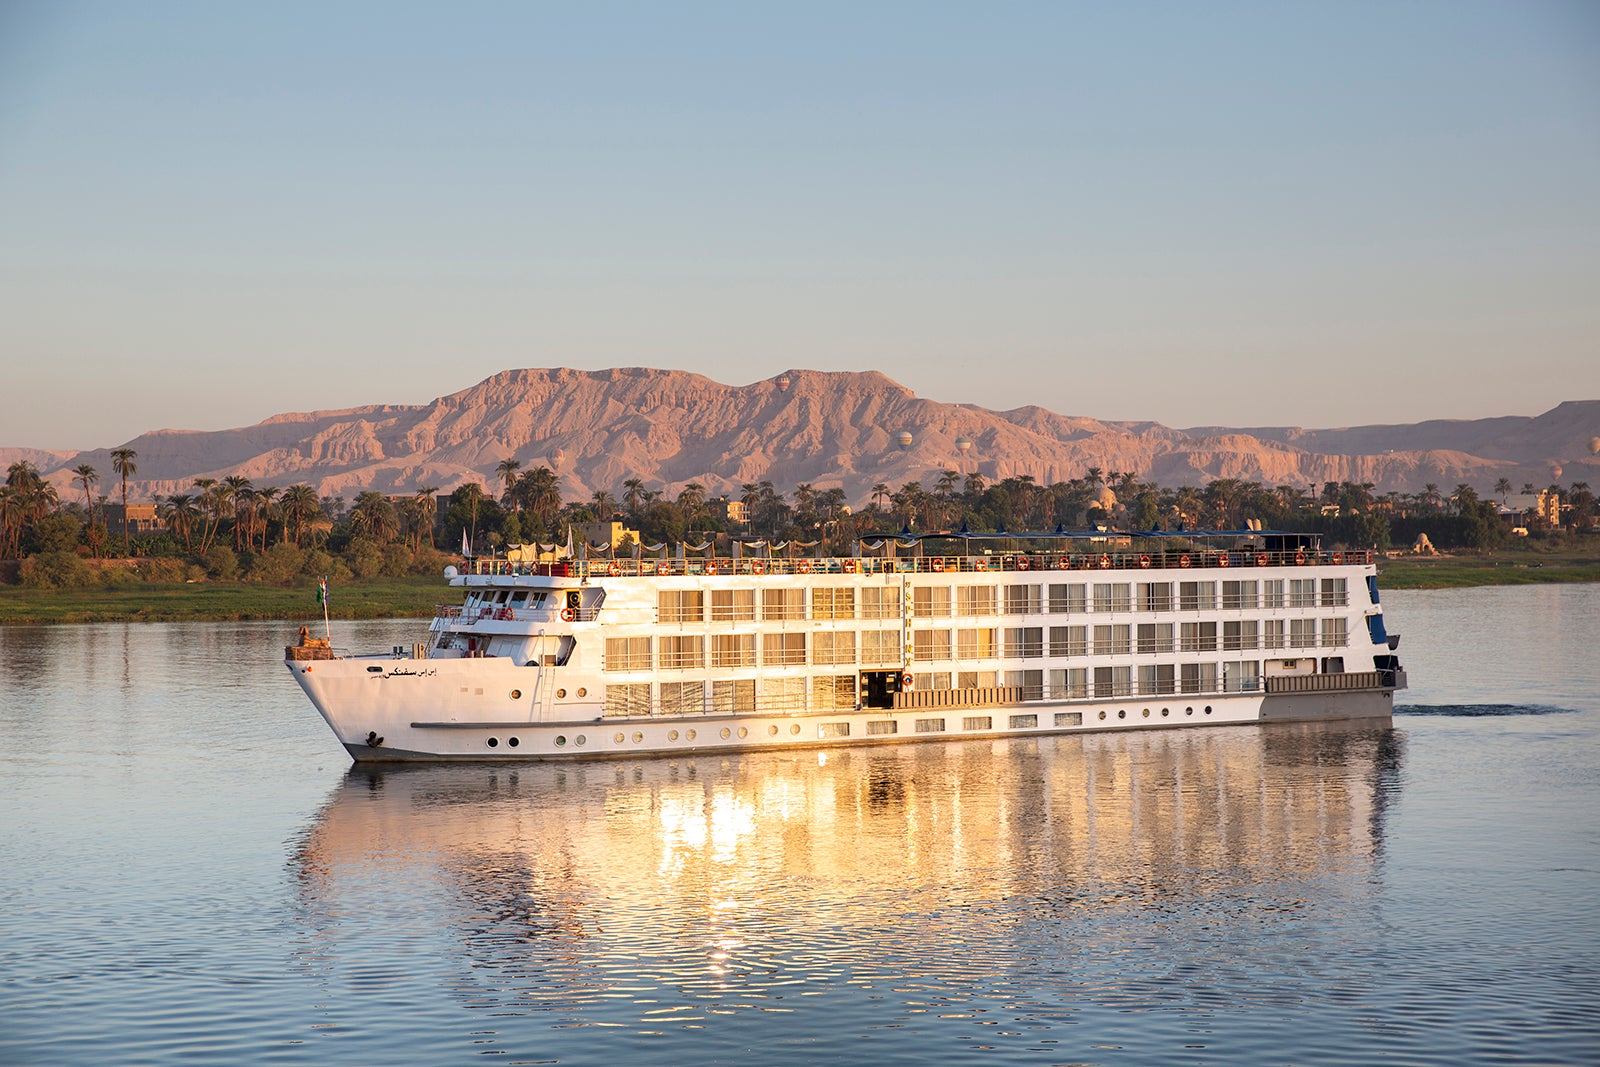 River cruise packing listing: What to pack when touring by riverboat